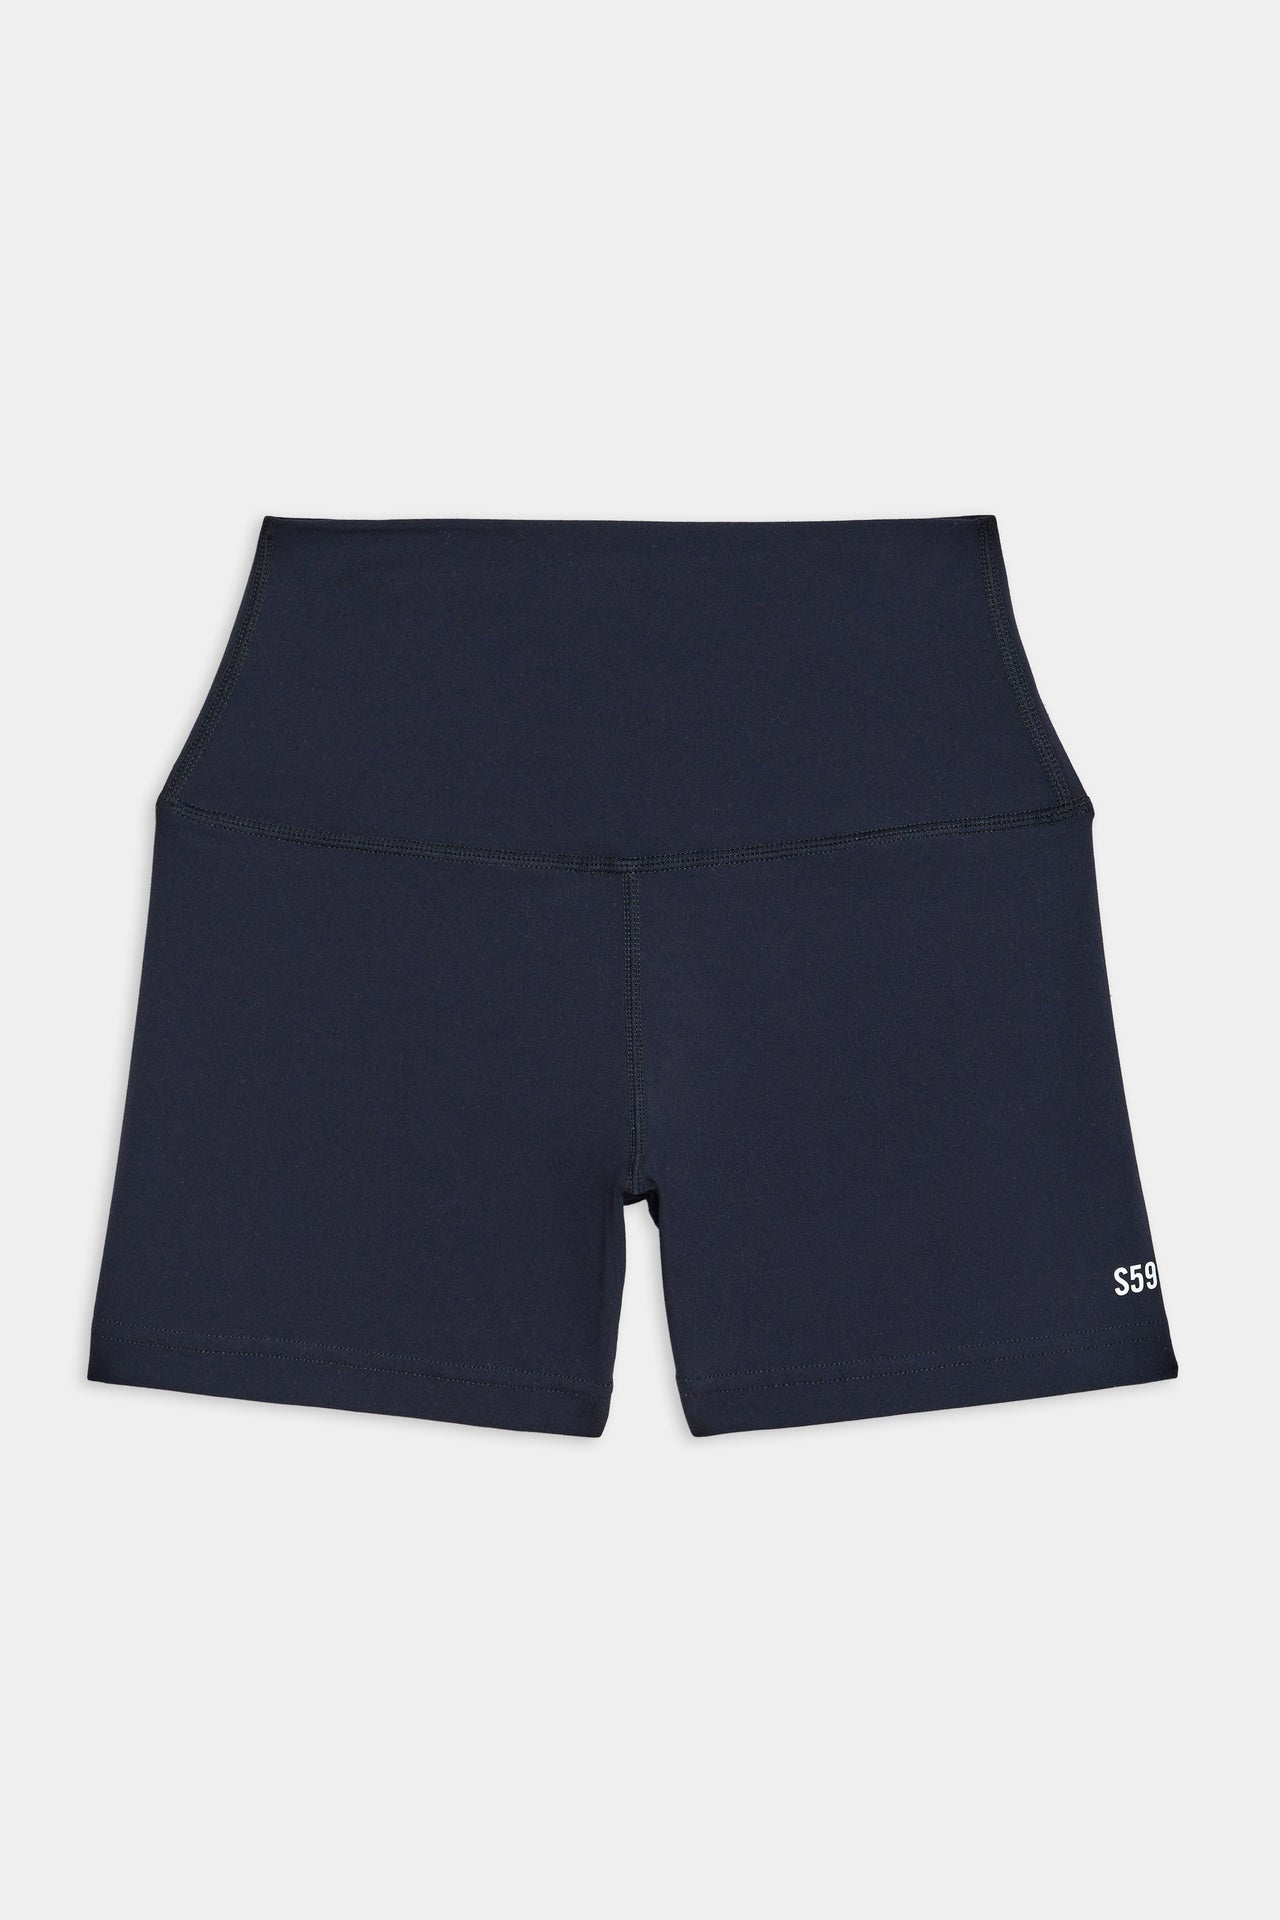 The women's SPLITS59 Airweight High Waist 3.5” Short with the logo on the side, perfect for hot yoga and Pilates.